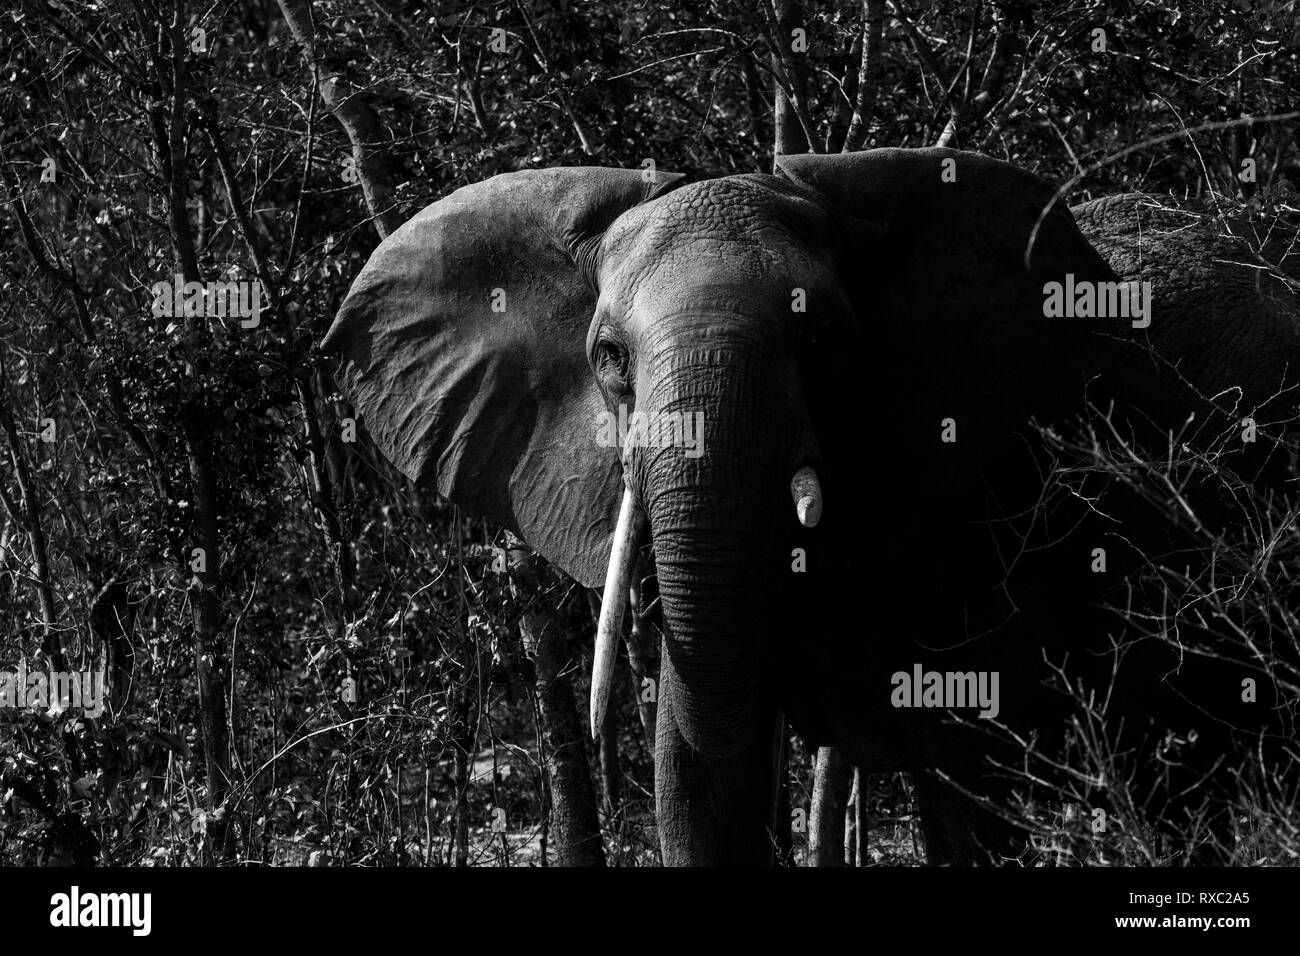 A black and white photo of an elephant with a broken tusk emerging from the bush in Hwange National Park, Zimbabwe Stock Photo